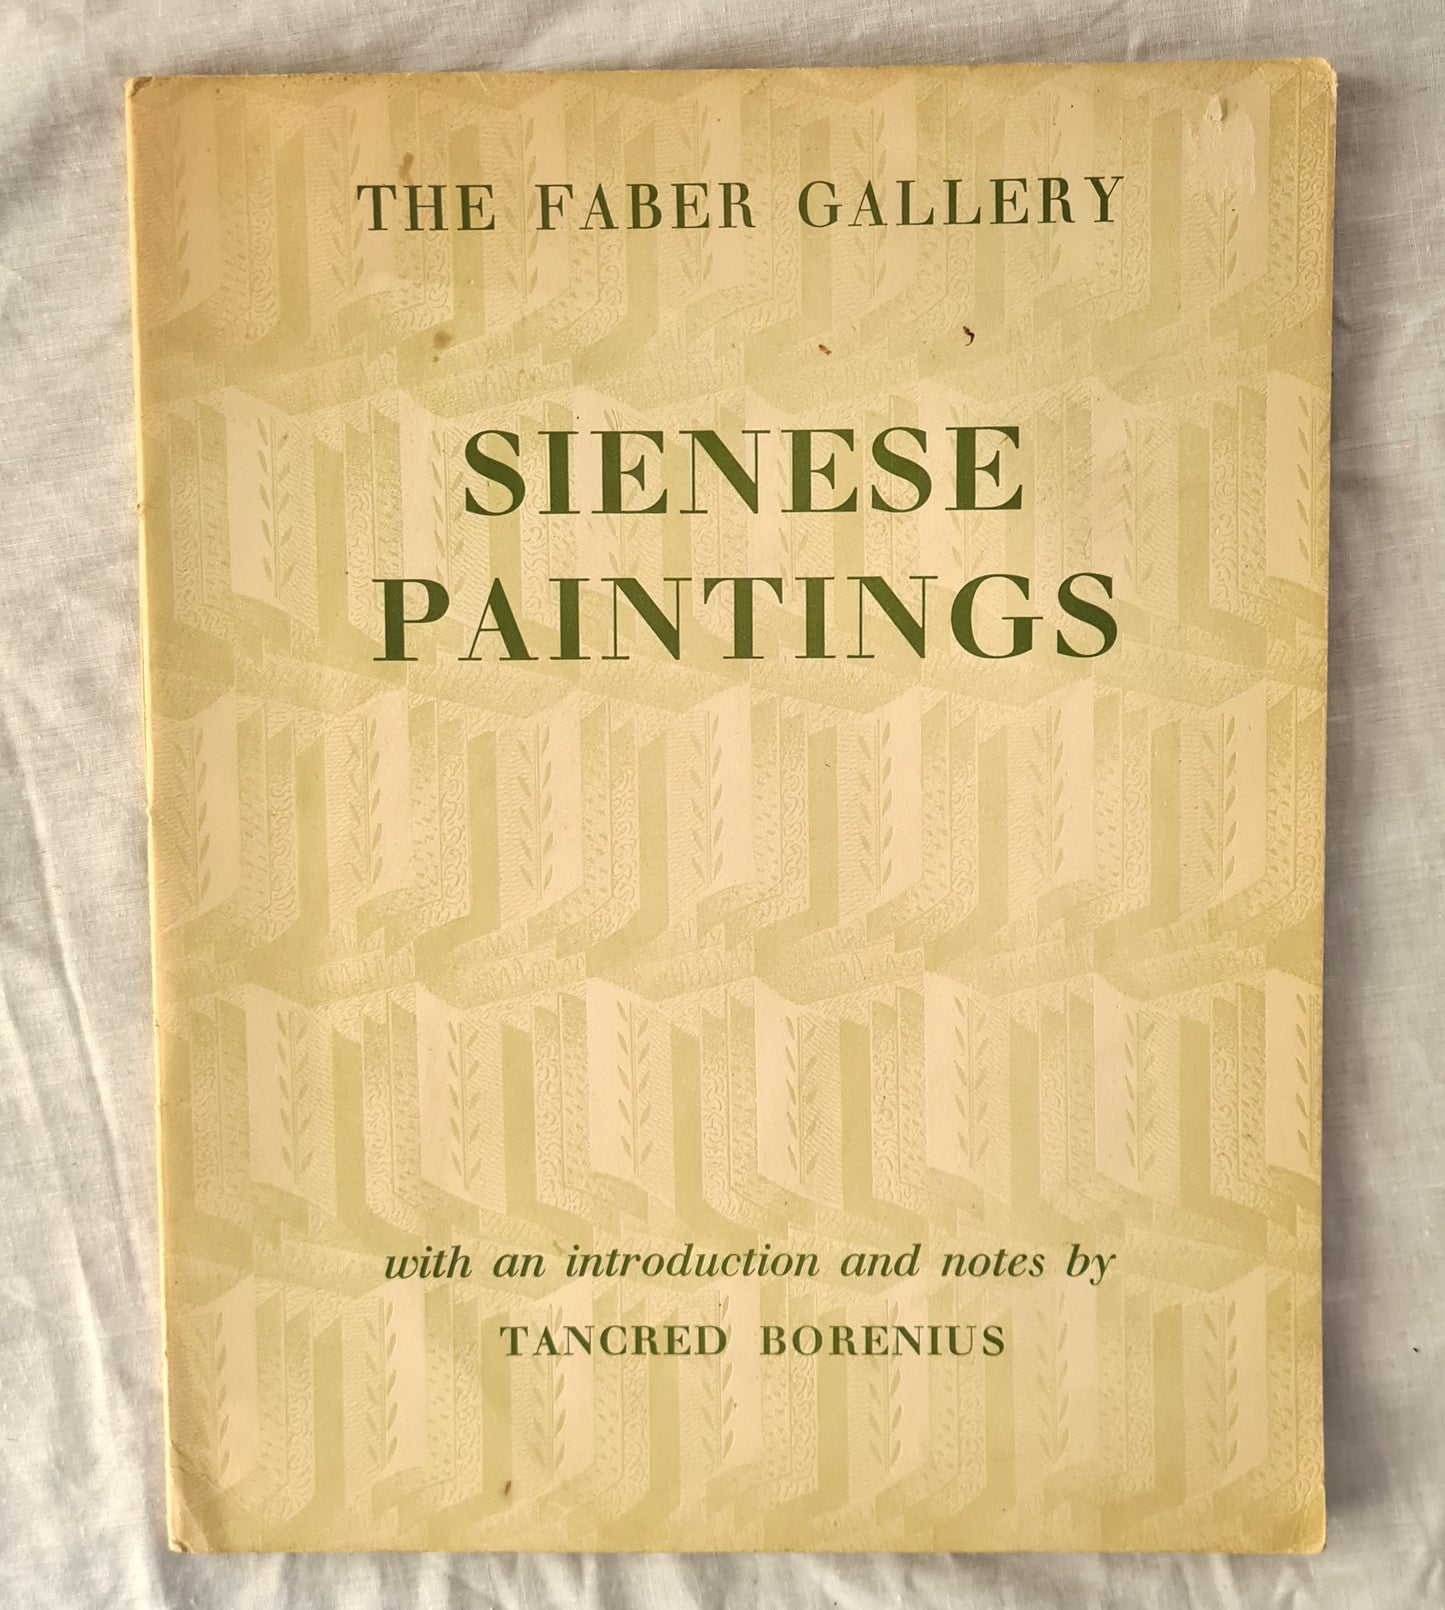 Sienese Paintings  The Faber Gallery  Introduction and Notes by Tancred Borenius